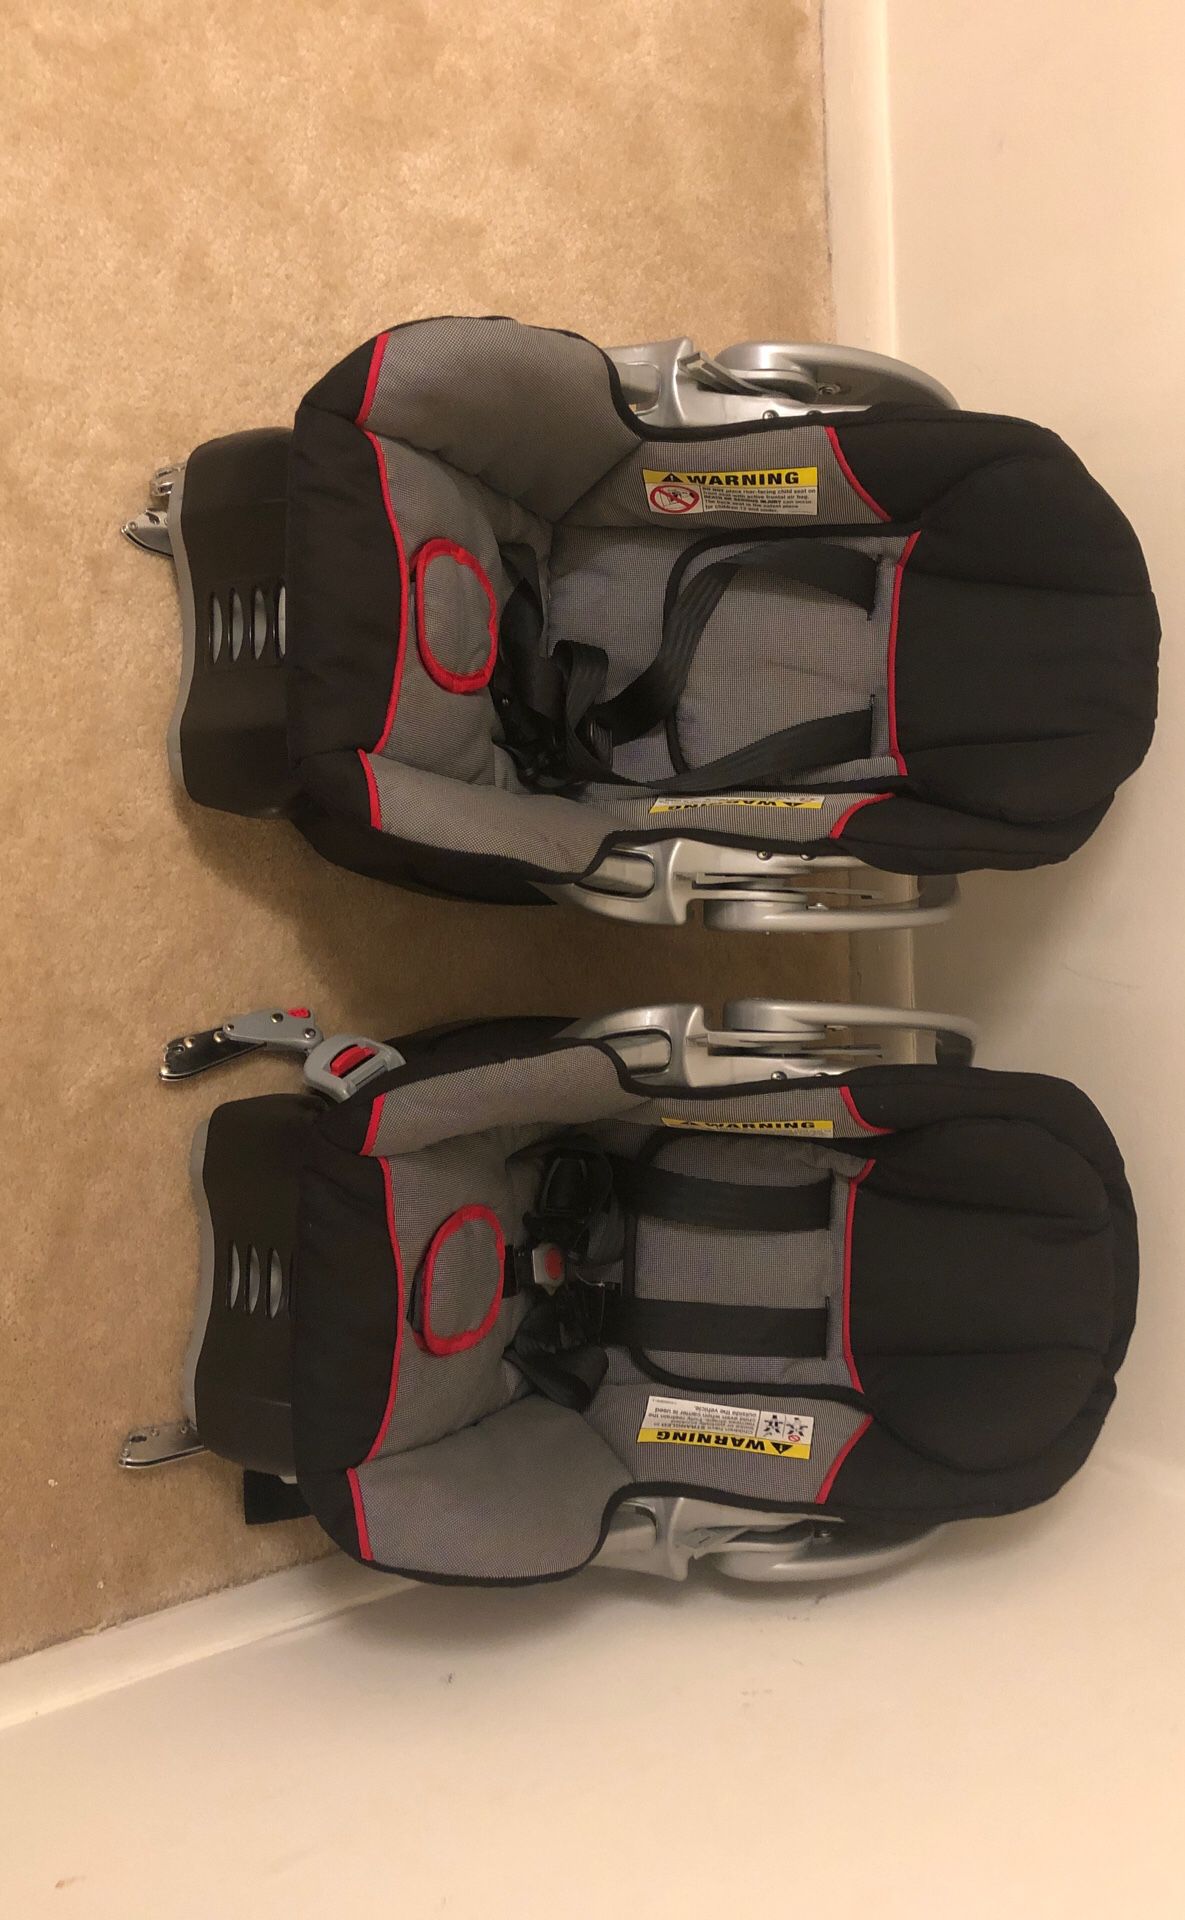 Two Infant Car Seats